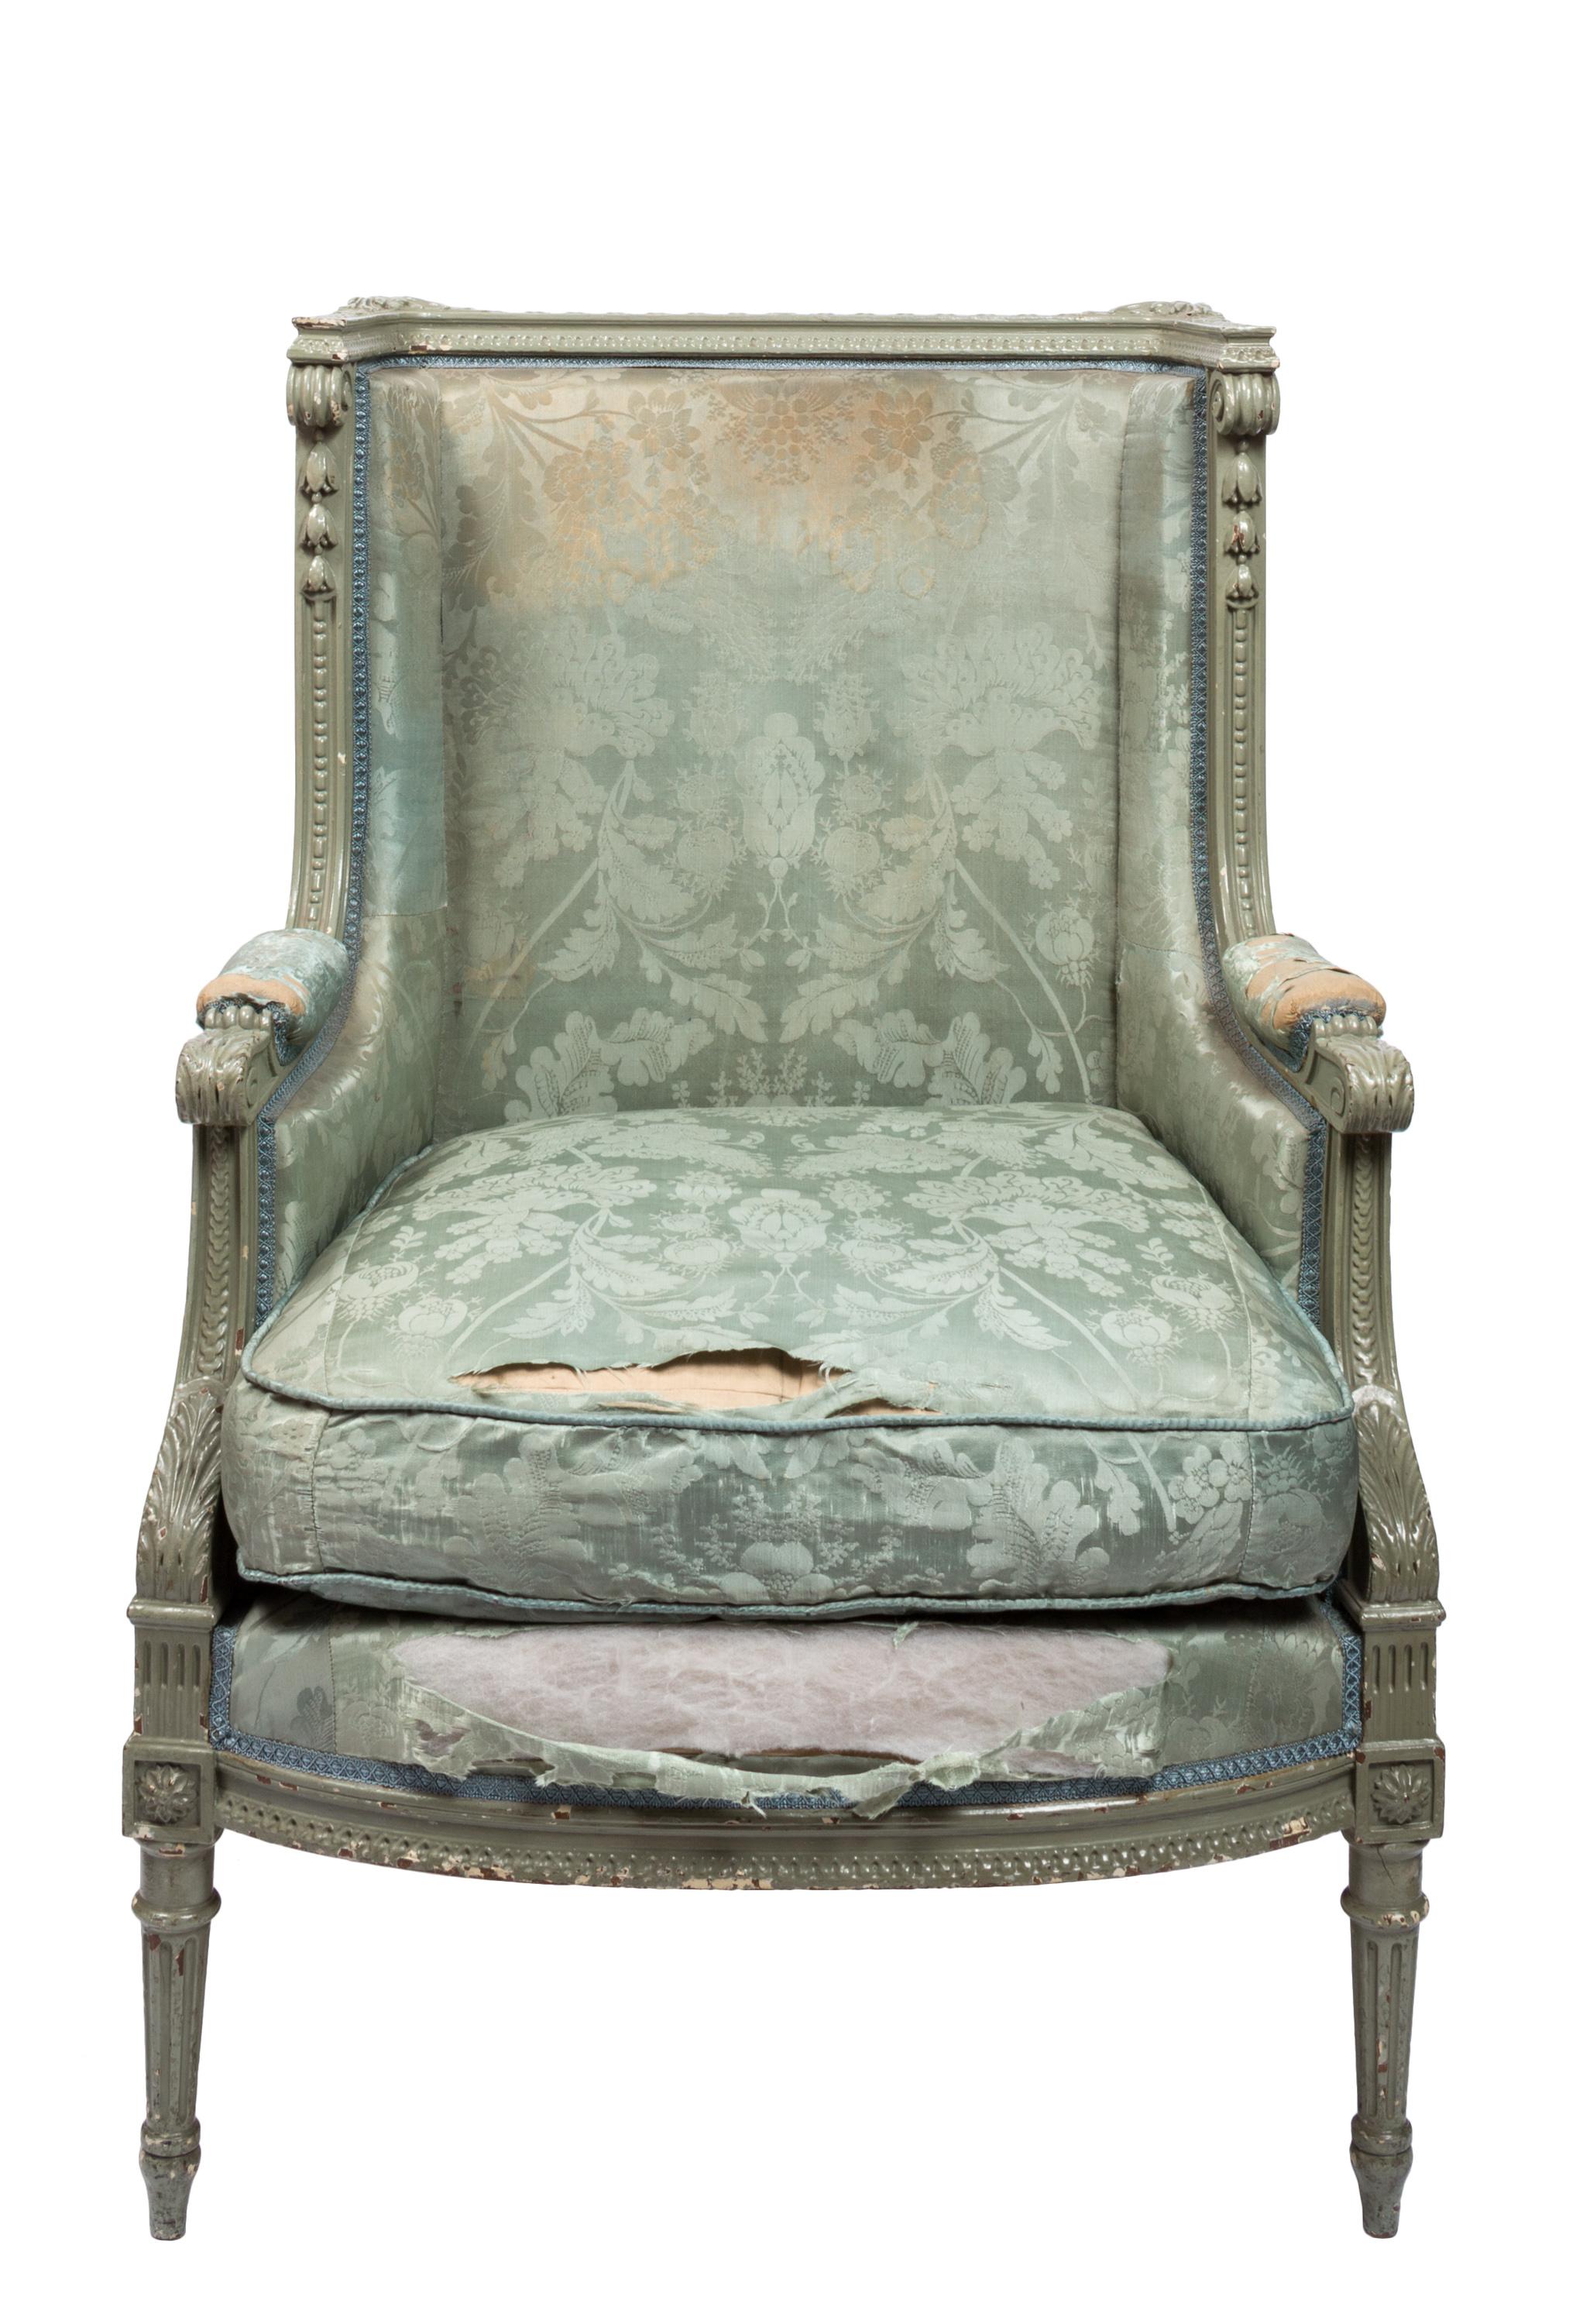 Design elements of this 19th century square-back, distressed silk upholstered armchair relate to the larger 